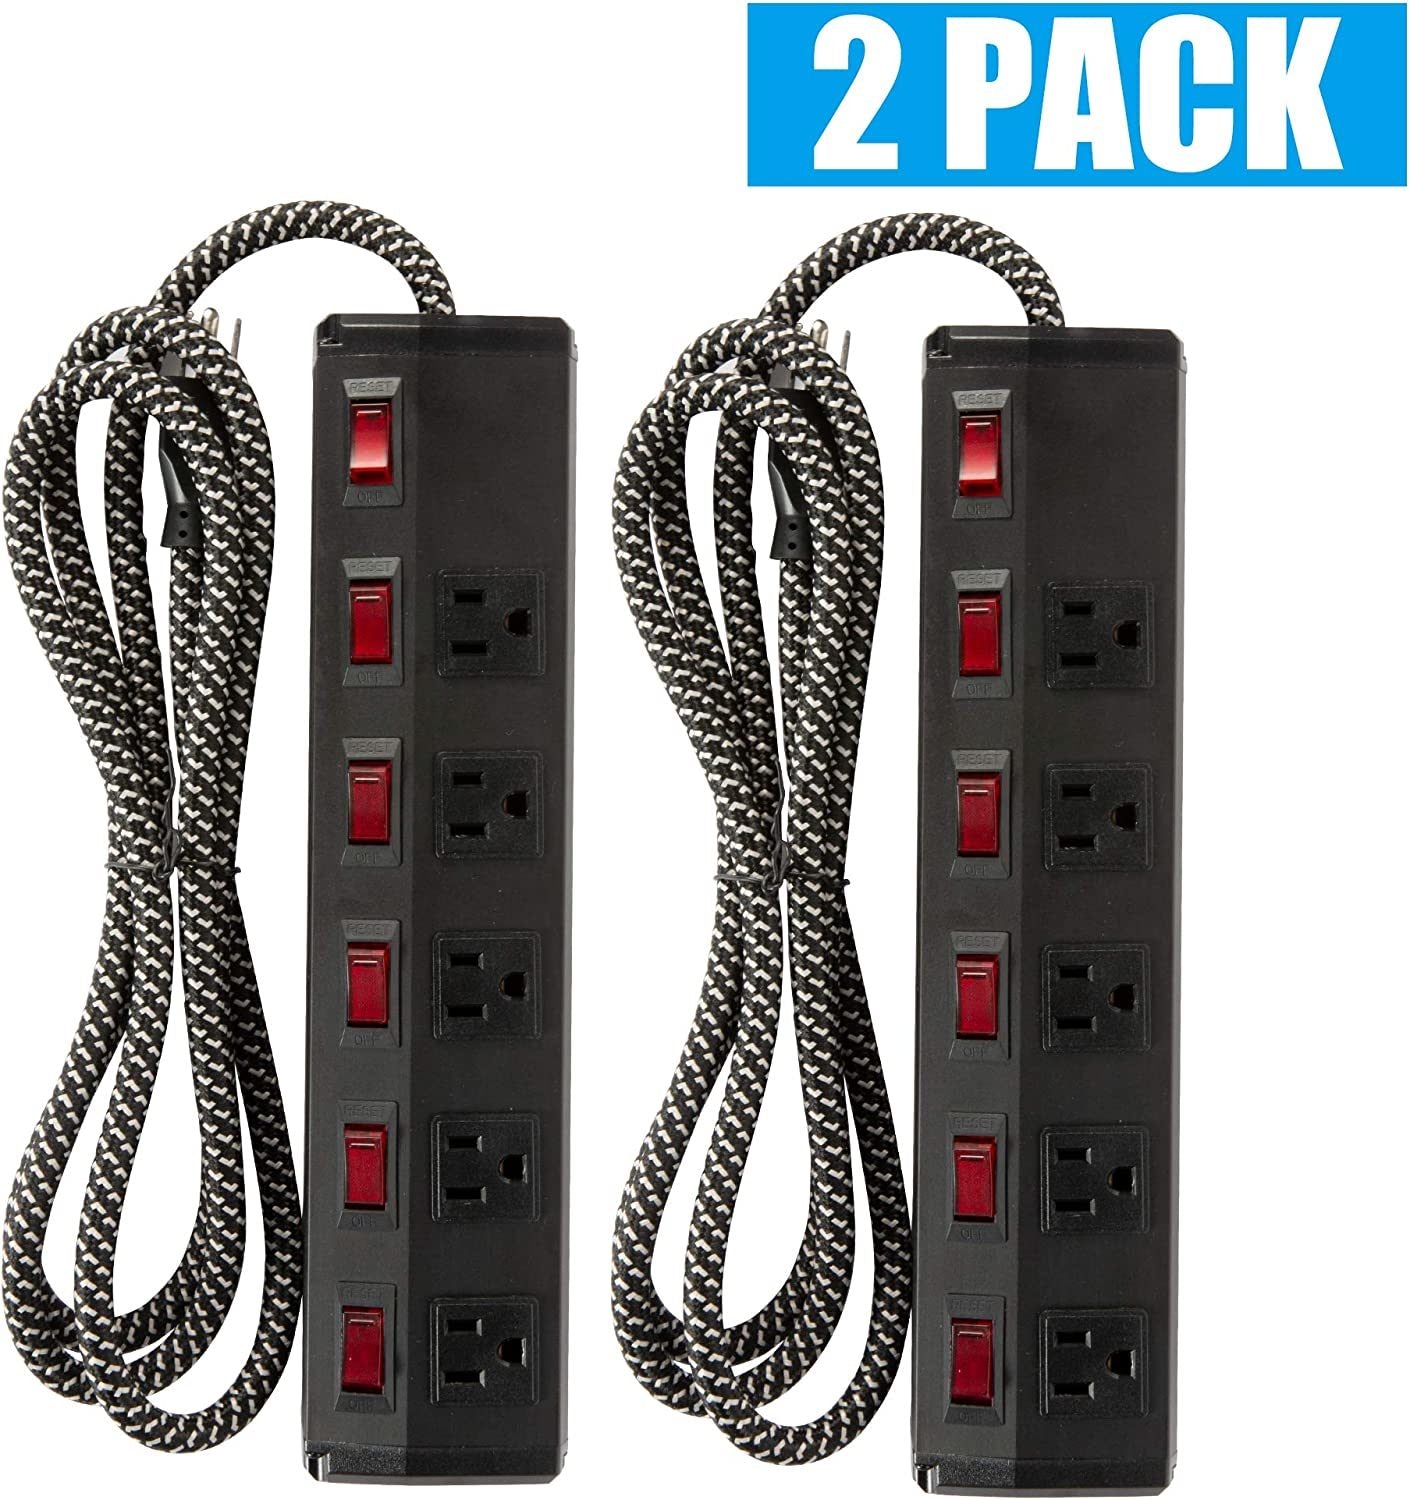 Bosonshop 2 Pack Long Power Strip Surge Protector;  6 Metal Power Outlets 2 USB Ports;  6 ft Long Extension Cord